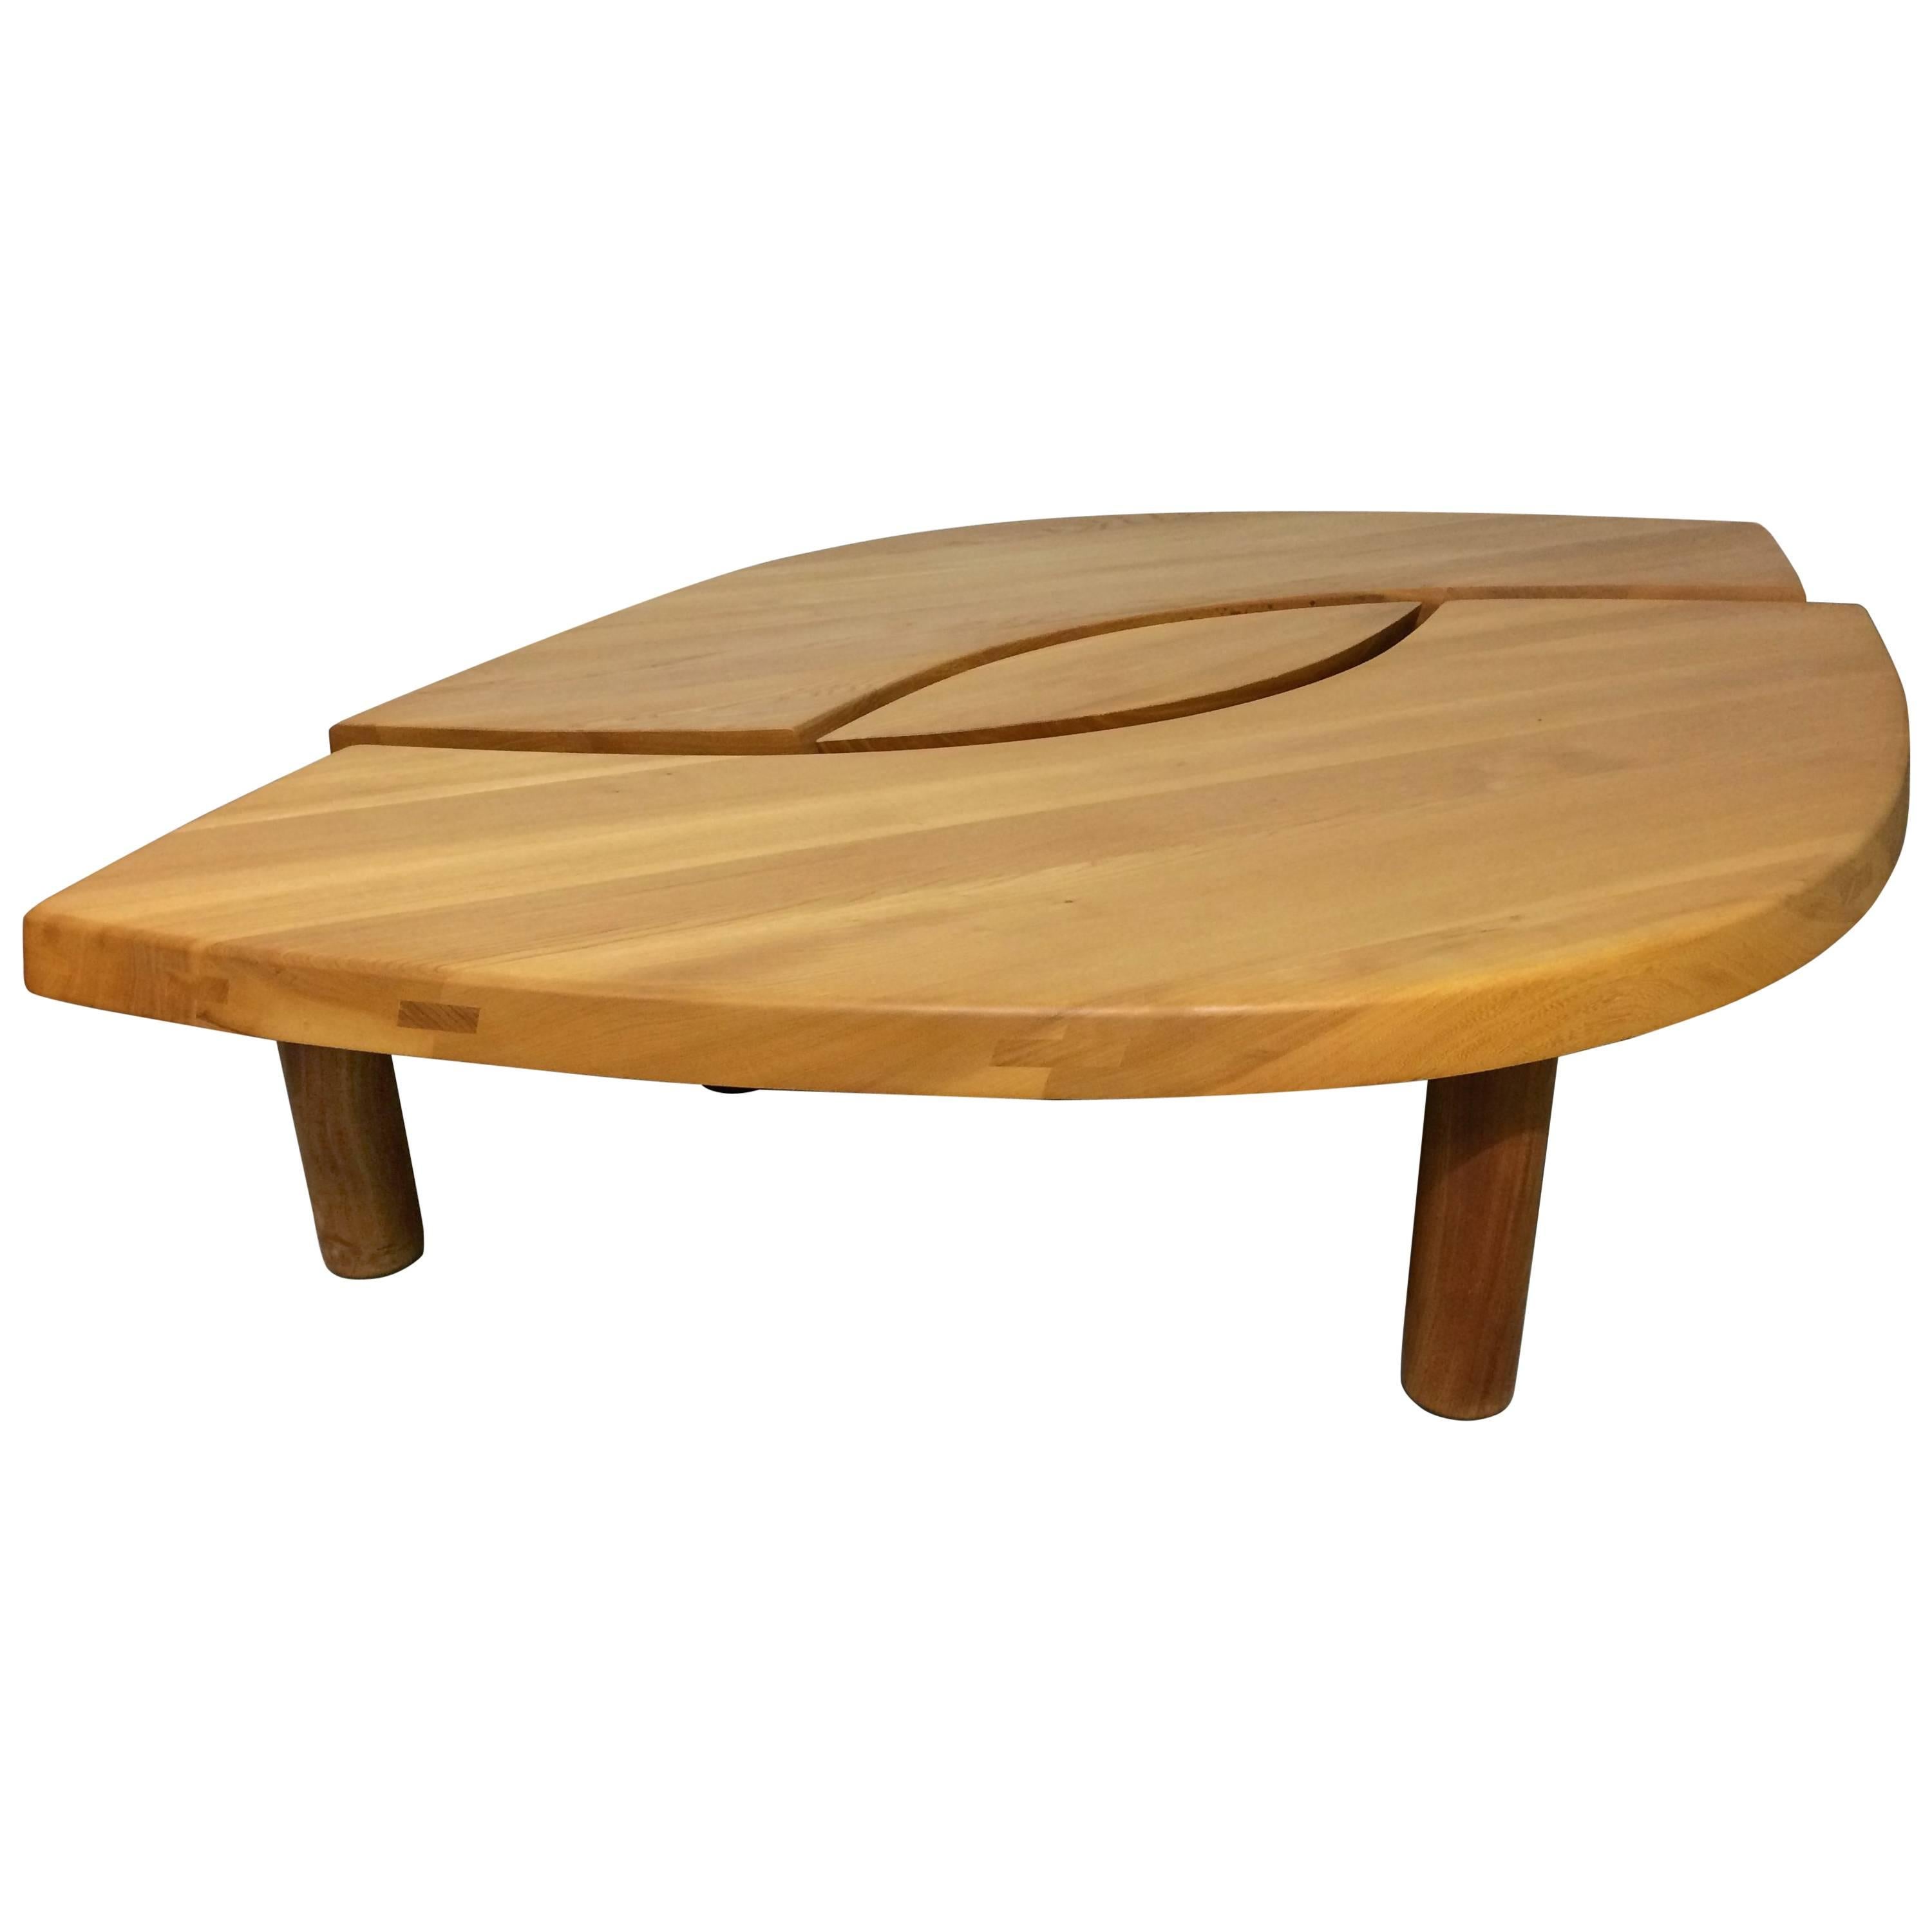 Pierre Chapo "The Eye" or "T-22" Solid Elm Coffee Table